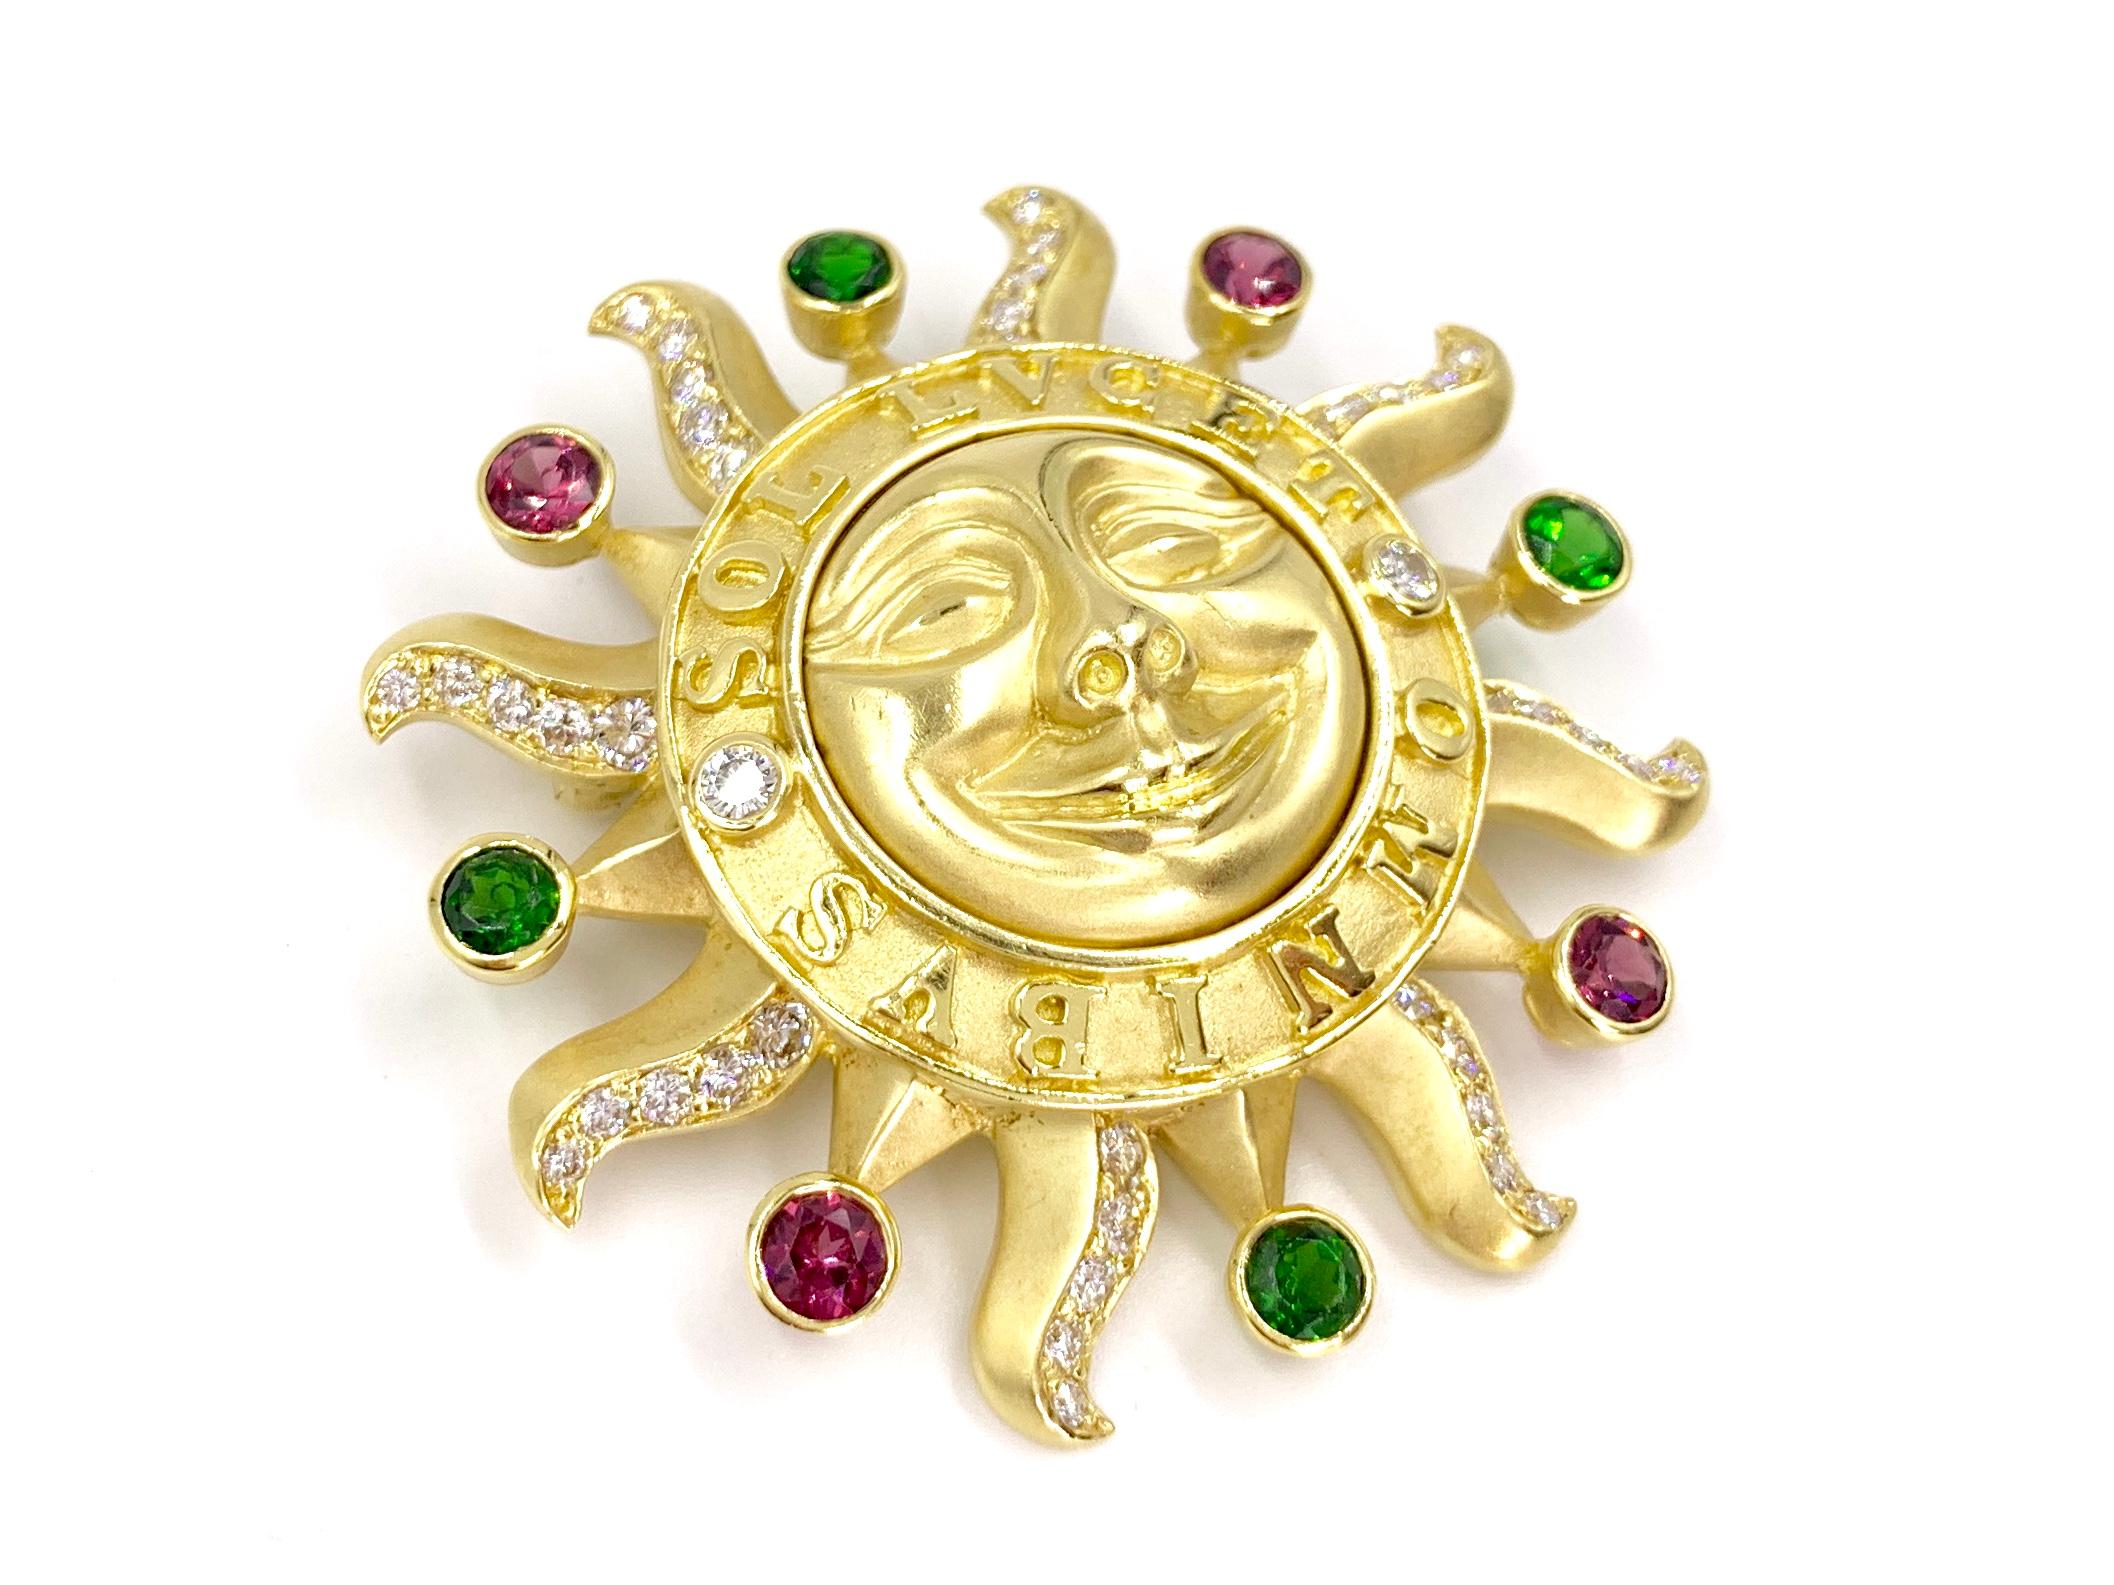 A solid and very well made 18 karat yellow gold smiling sun brooch adorned with white diamonds and vibrant pink and green tourmaline gemstones, crafted by SeidenGang jewelry company. Sun is carved with the Latin saying 